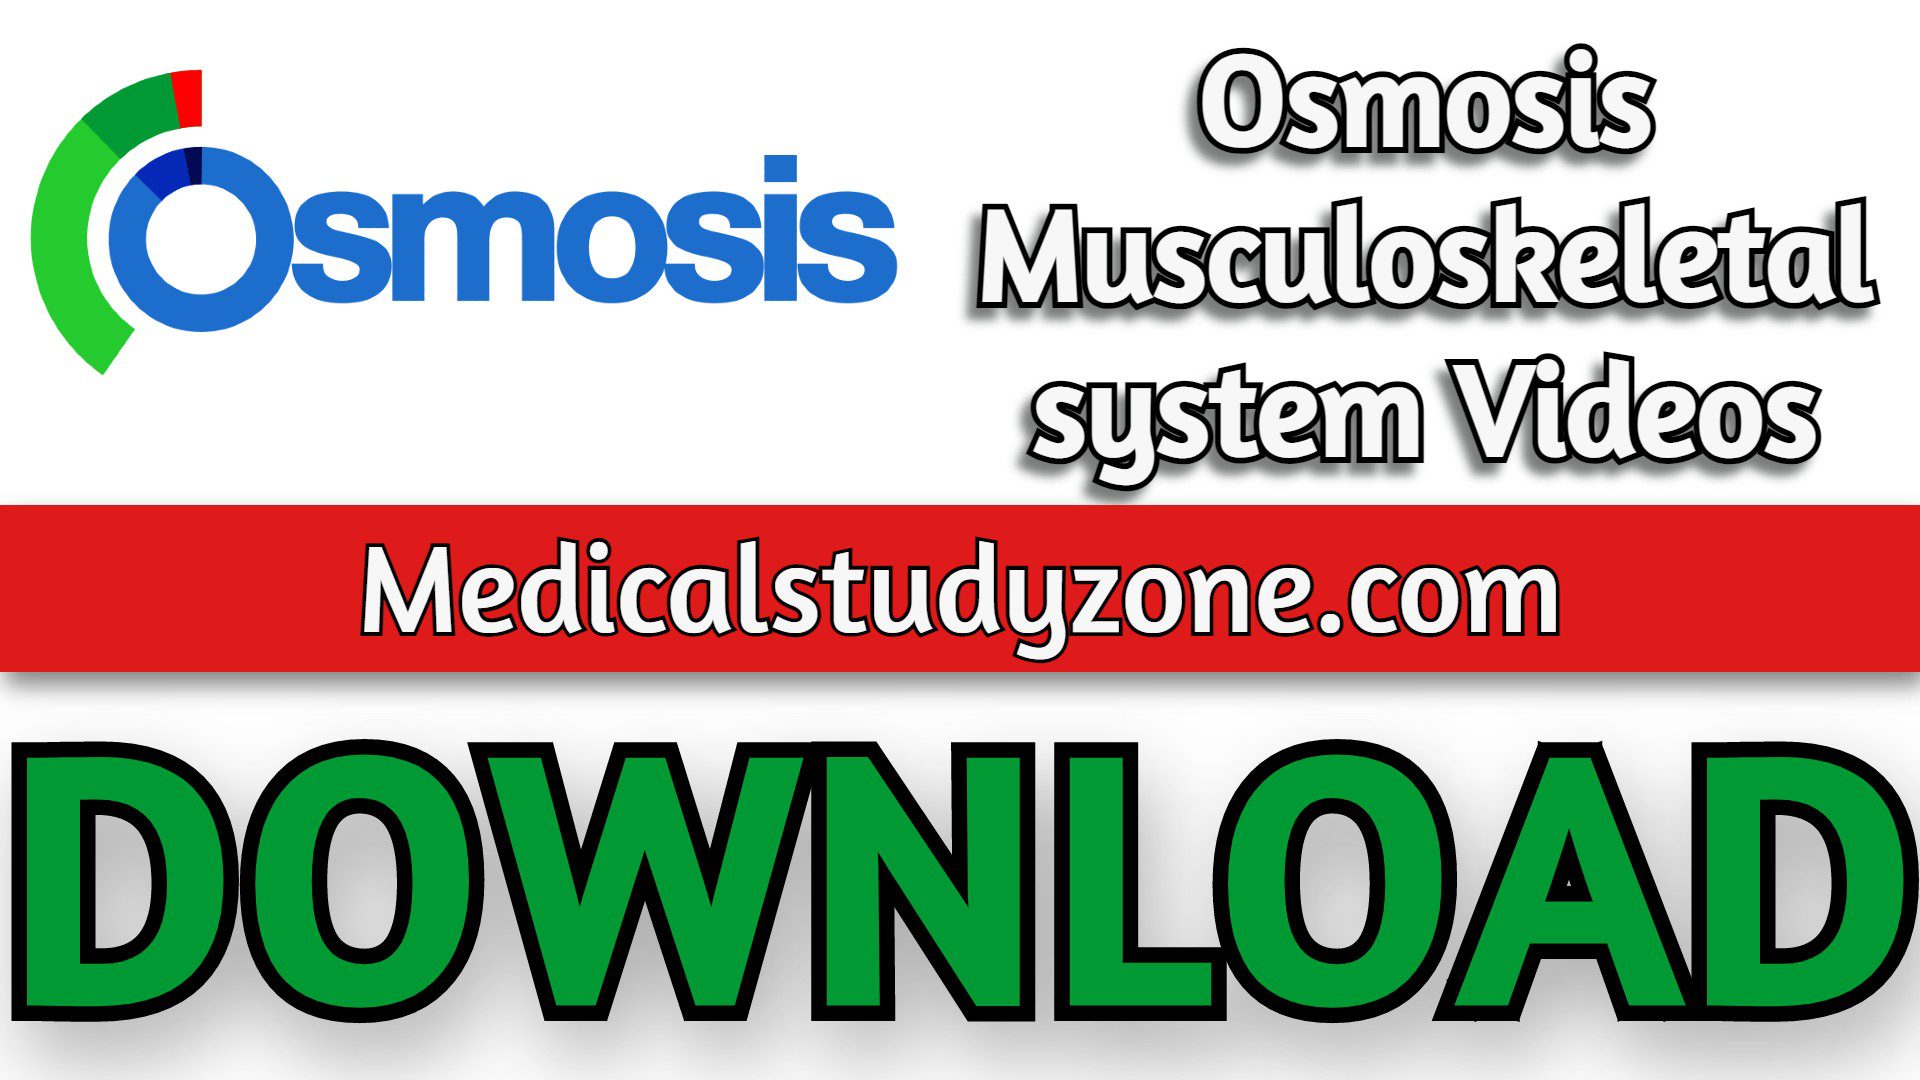 Osmosis Musculoskeletal system Videos 2022 Free Download